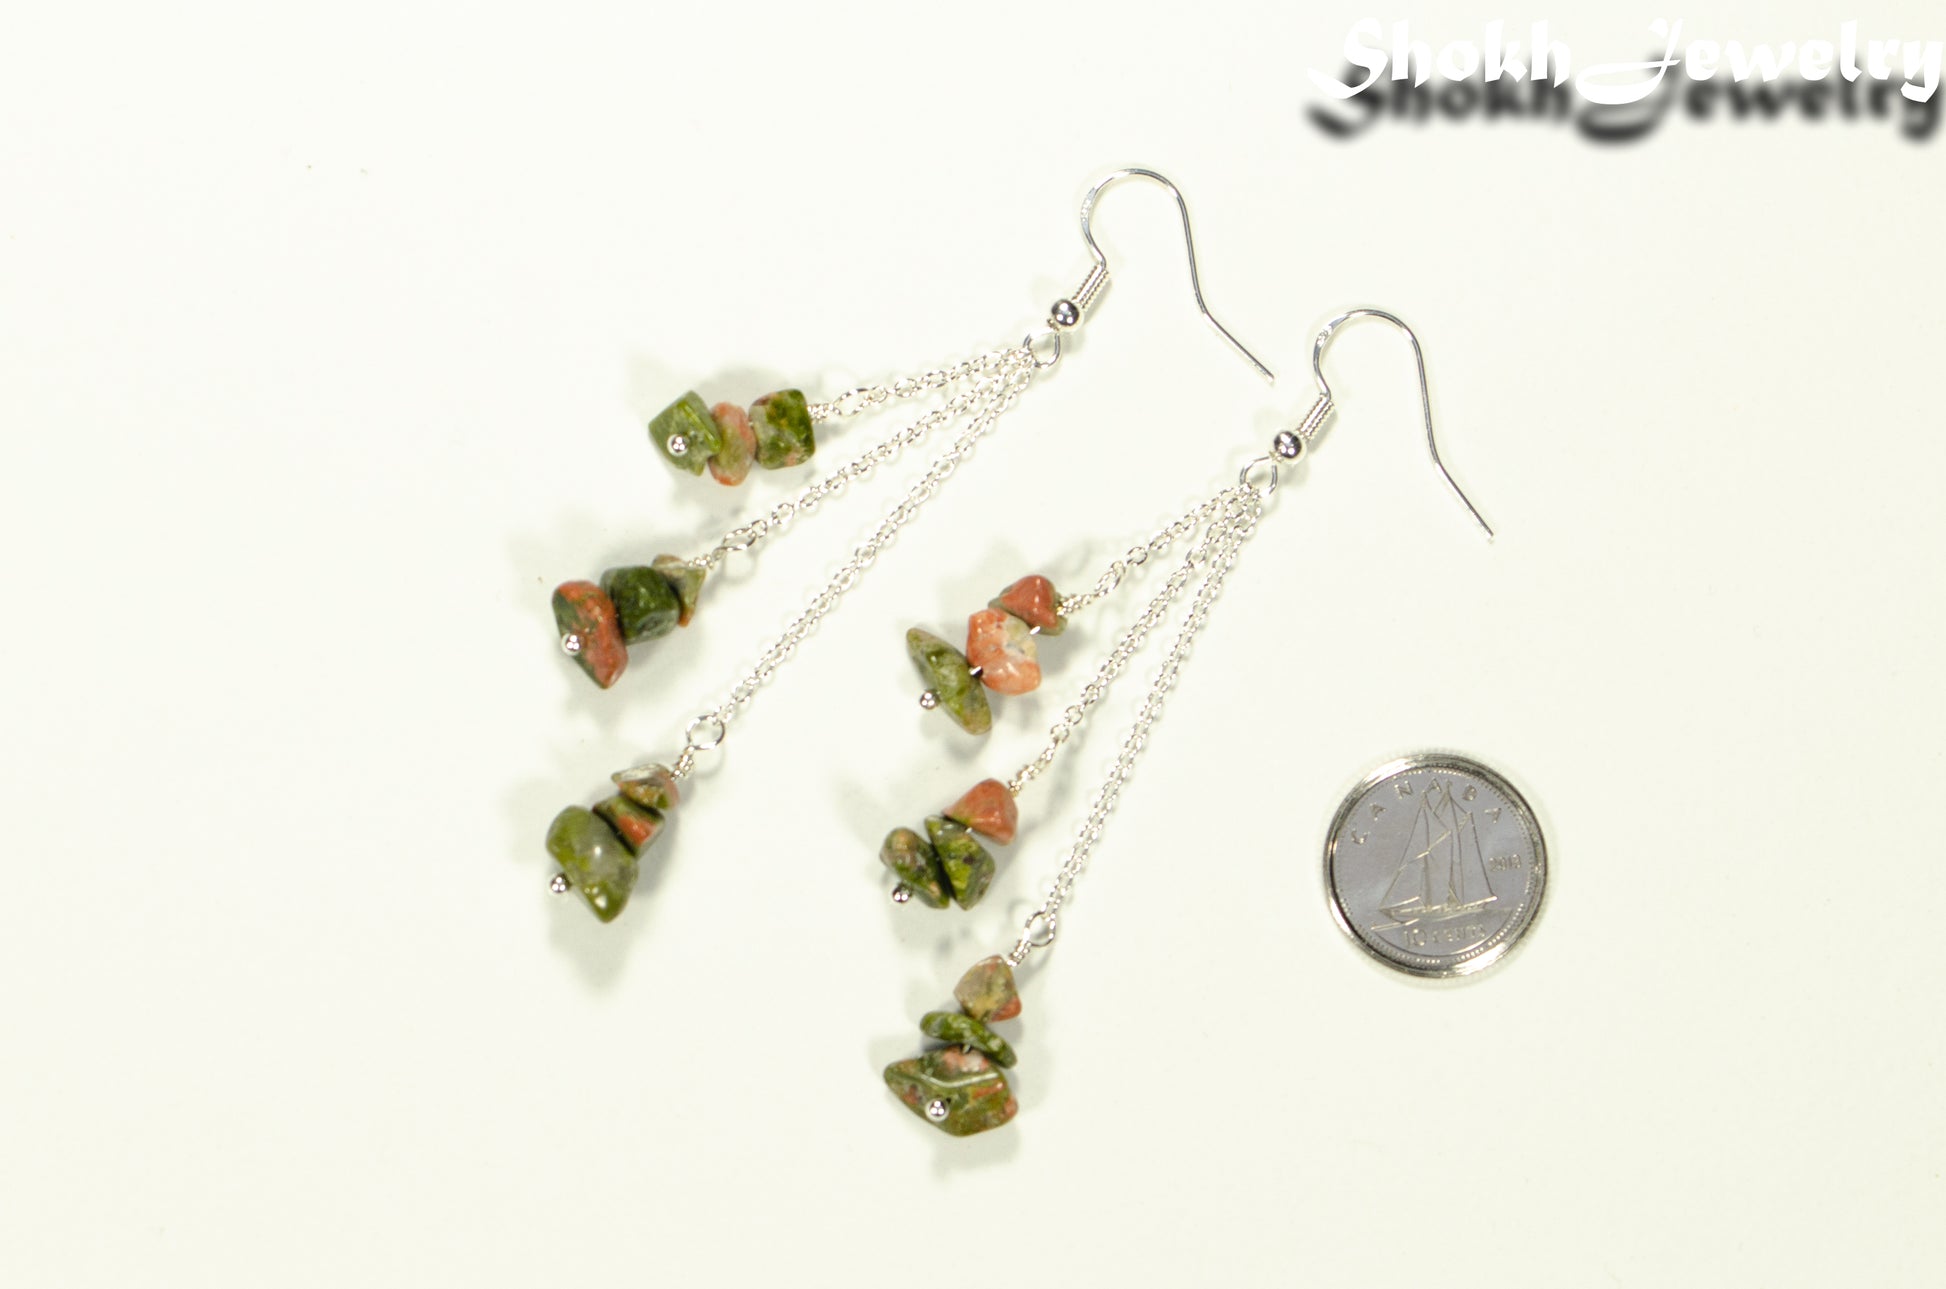 Long Silver Plated Chain and Unakite Crystal Chip Earrings beside a dime.